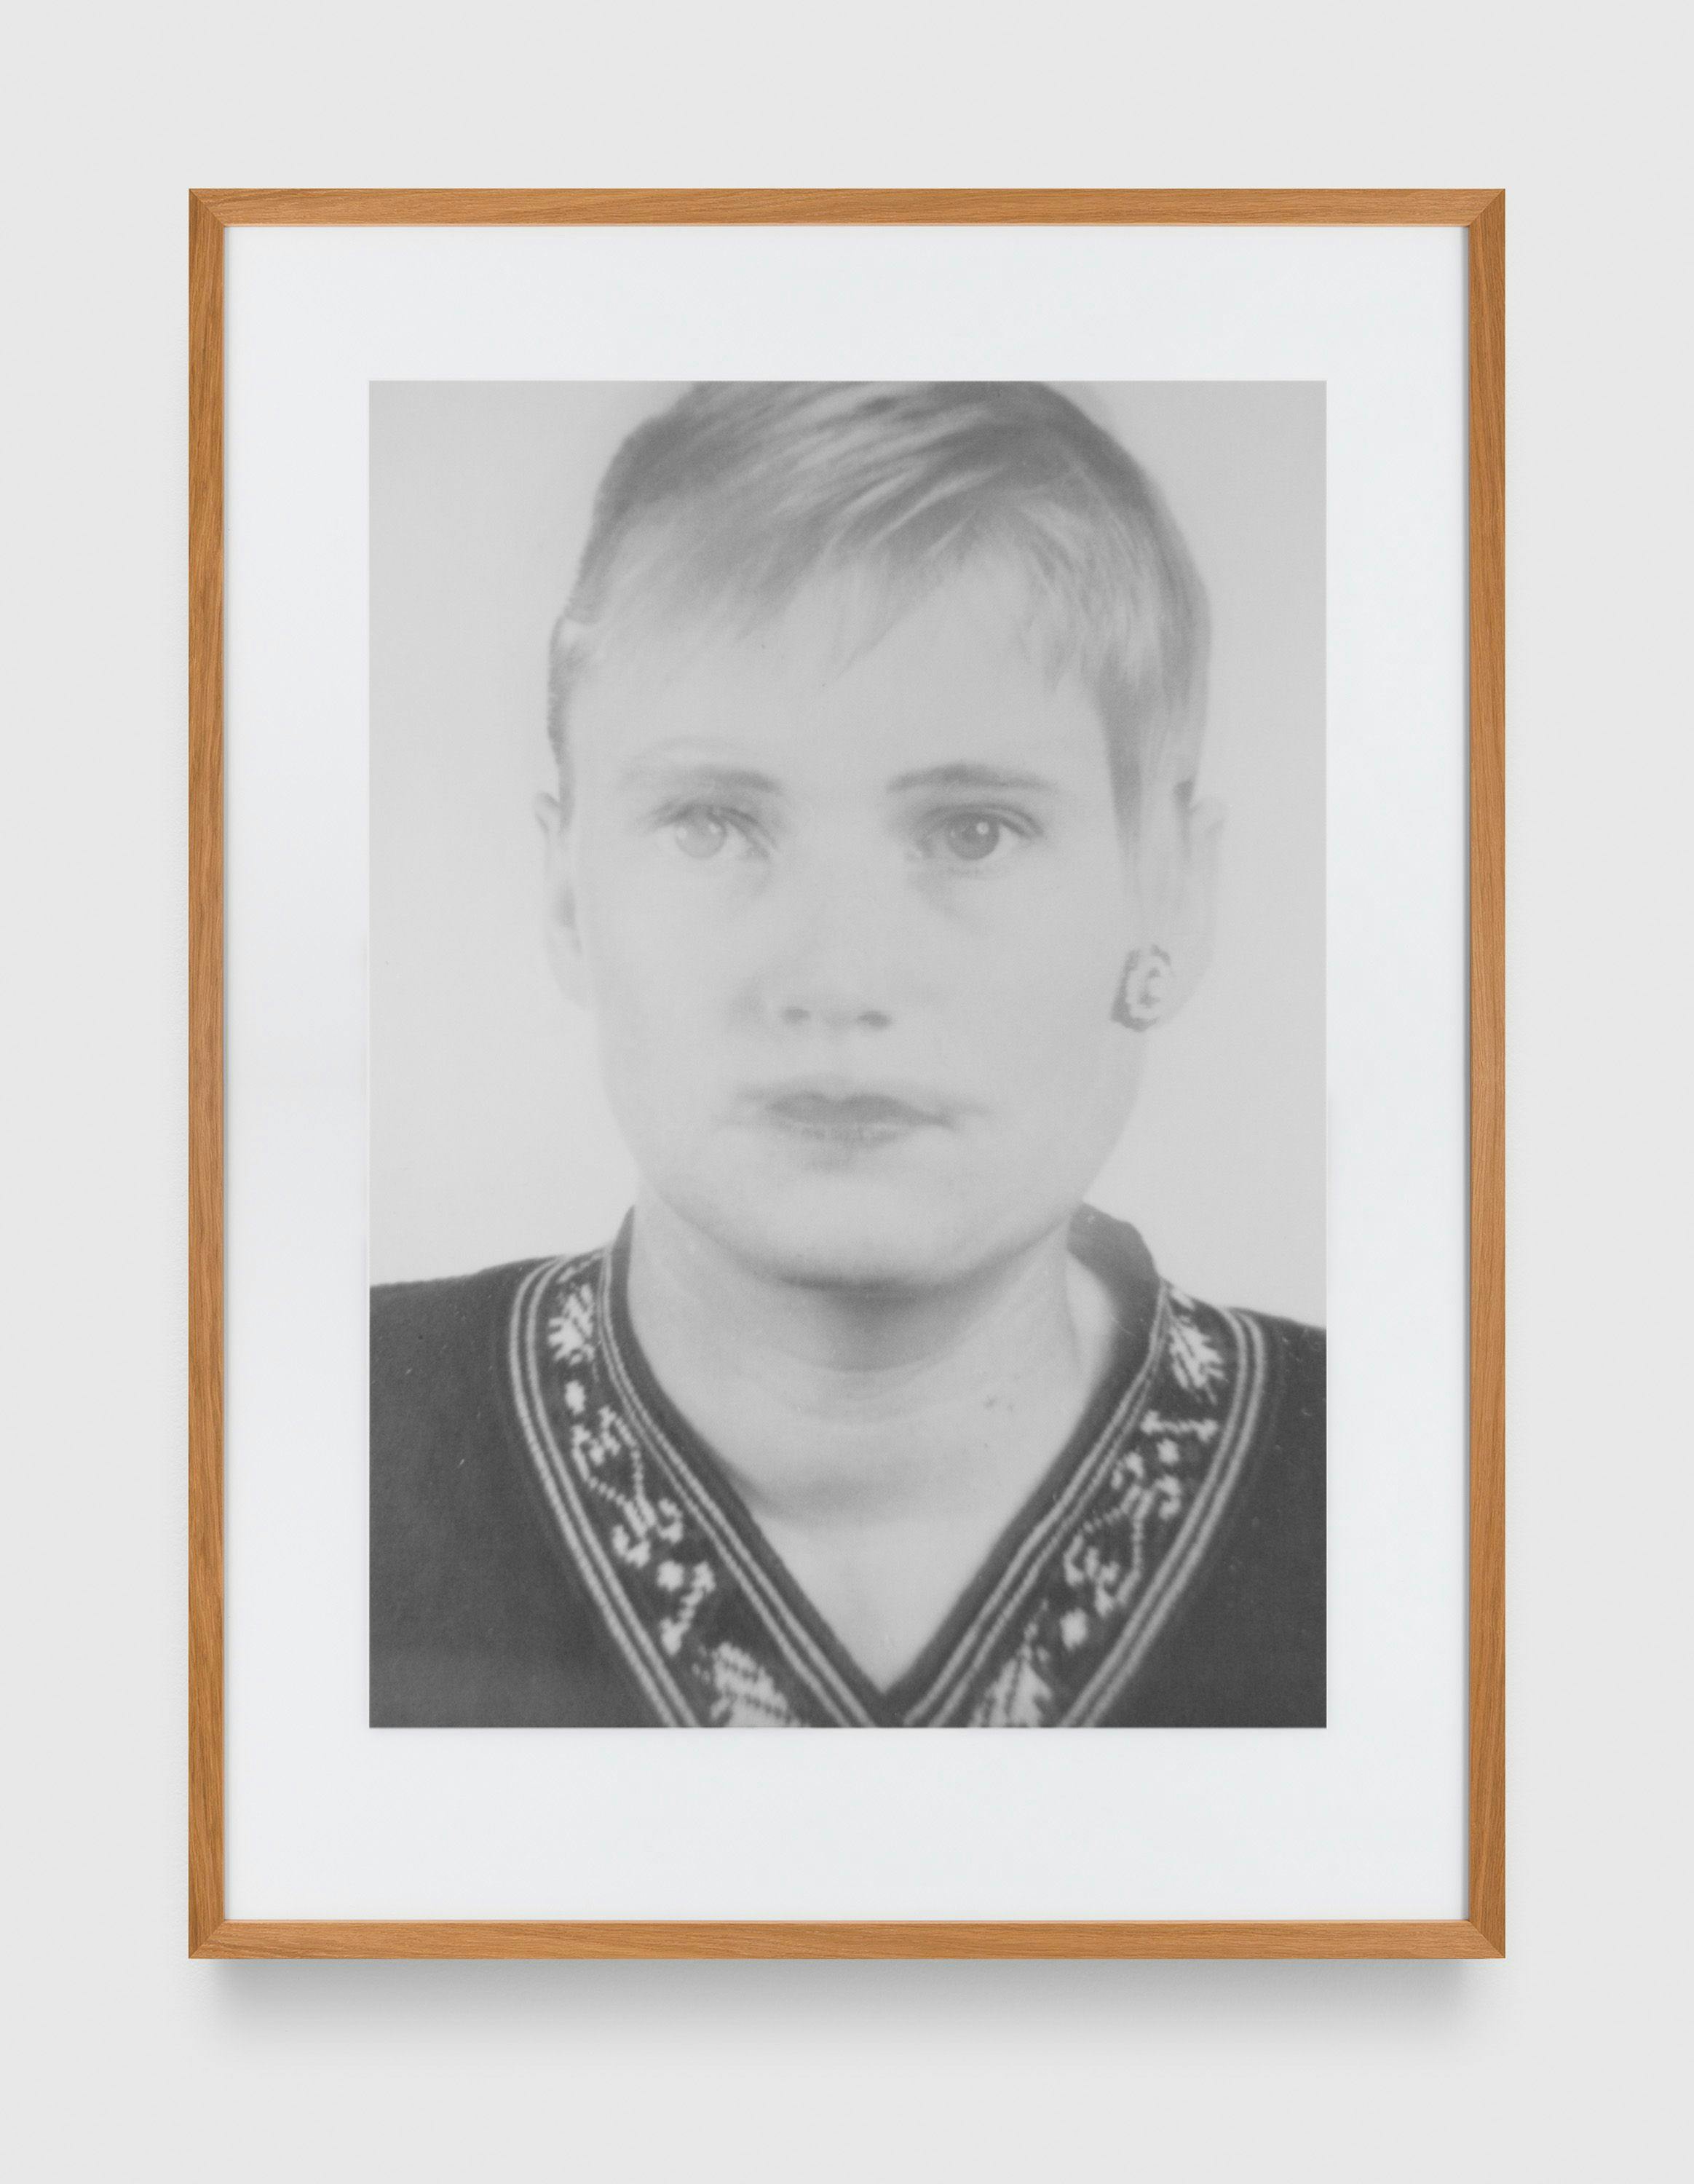 A print by Thomas Ruff, titled anderes Porträt Nr. 109A/32, dated in 1994 and 1995.